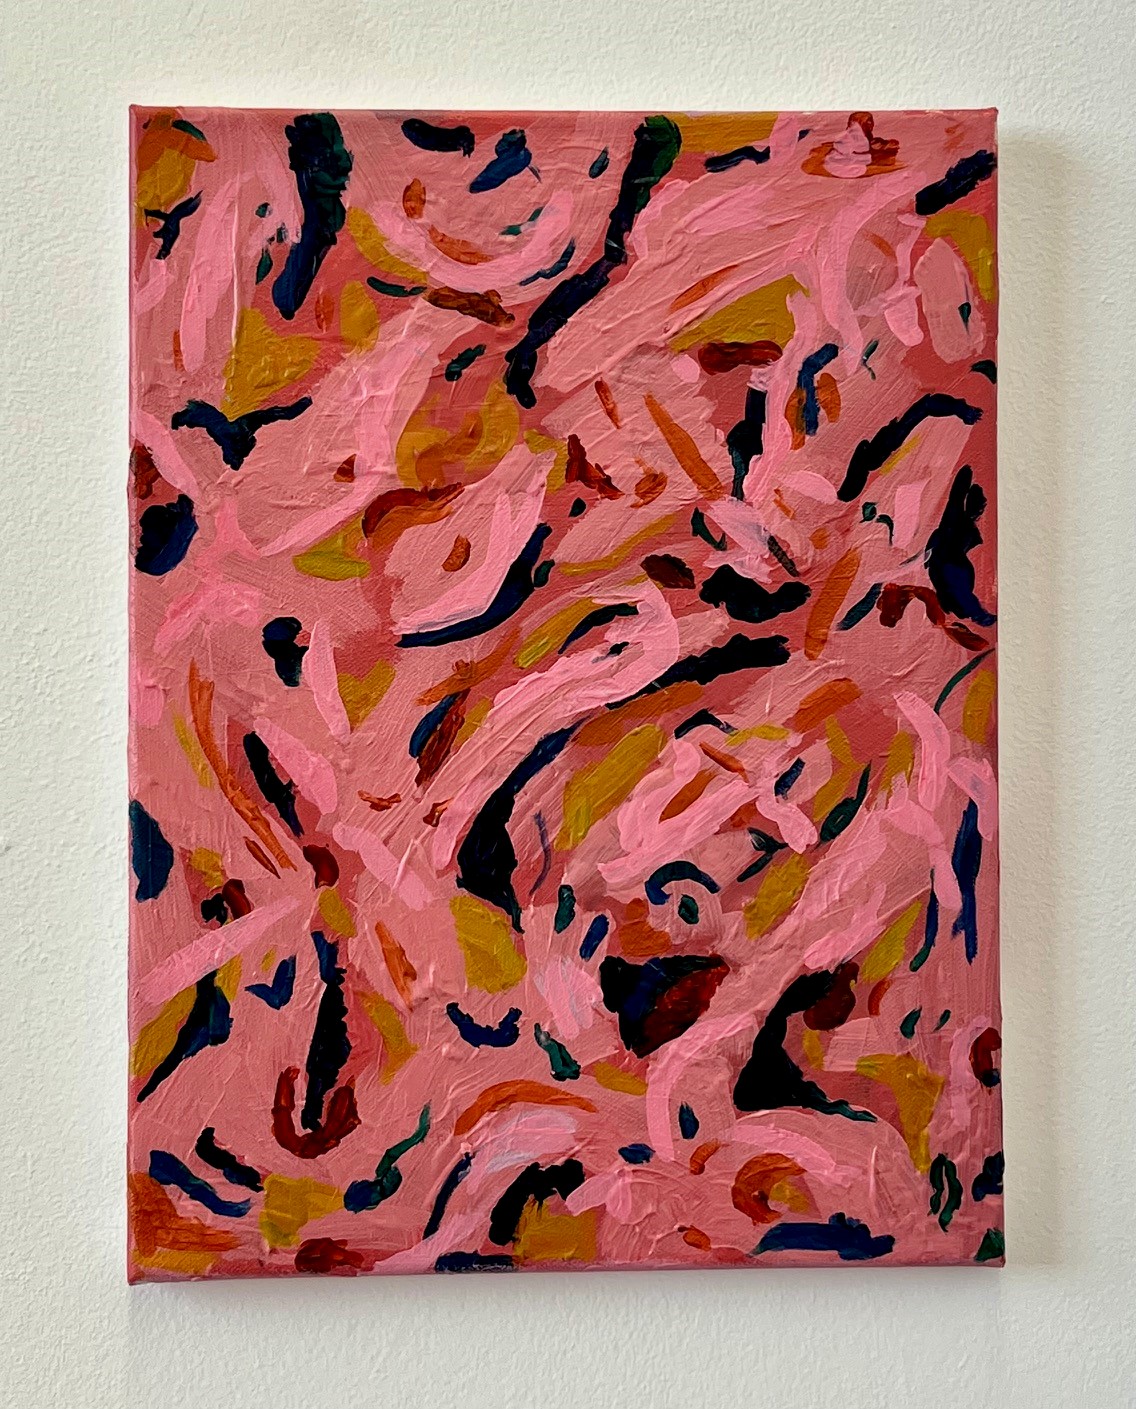 Fine Art painting by Molly Carter showing a pink canvas